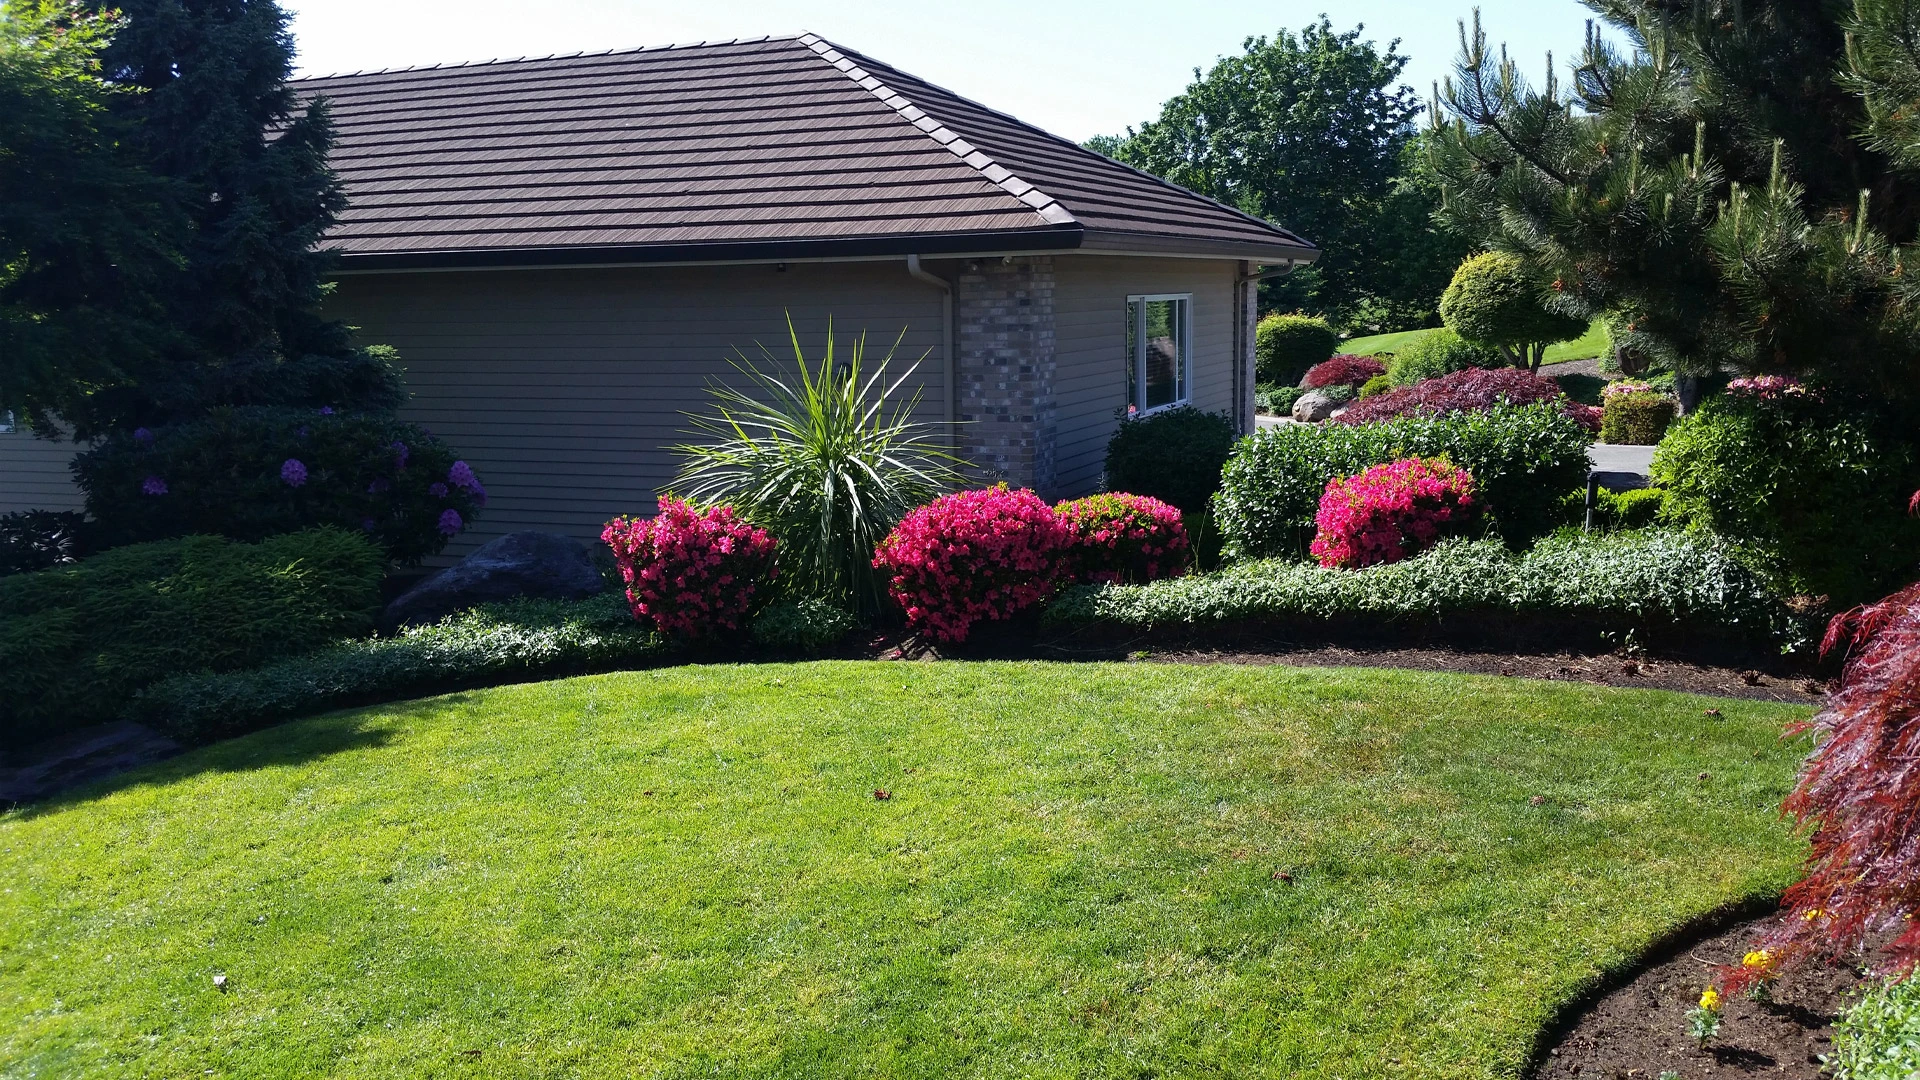 Landscaping with mature shrubs and flowers that we maintain on a regular basis.